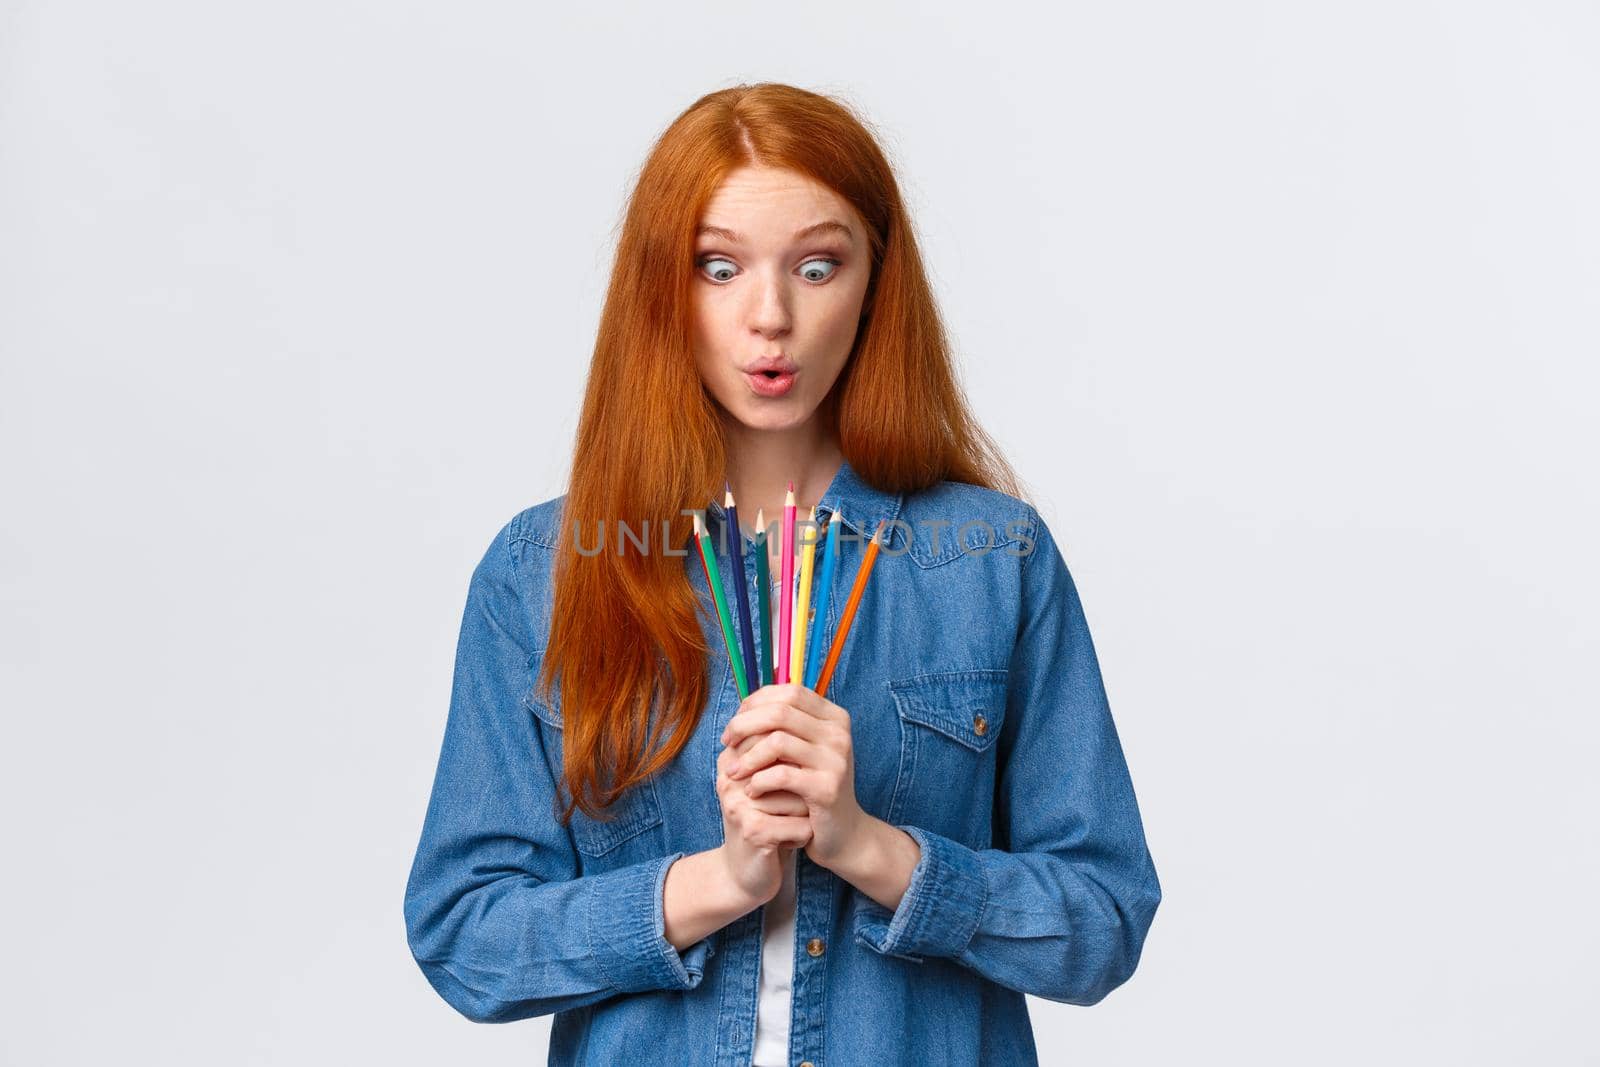 Girl eager start new art course, learn how to design, make models, standing with colored pencils, folding lips amused, looking at tools wondered and thrilled, drawing over white background.